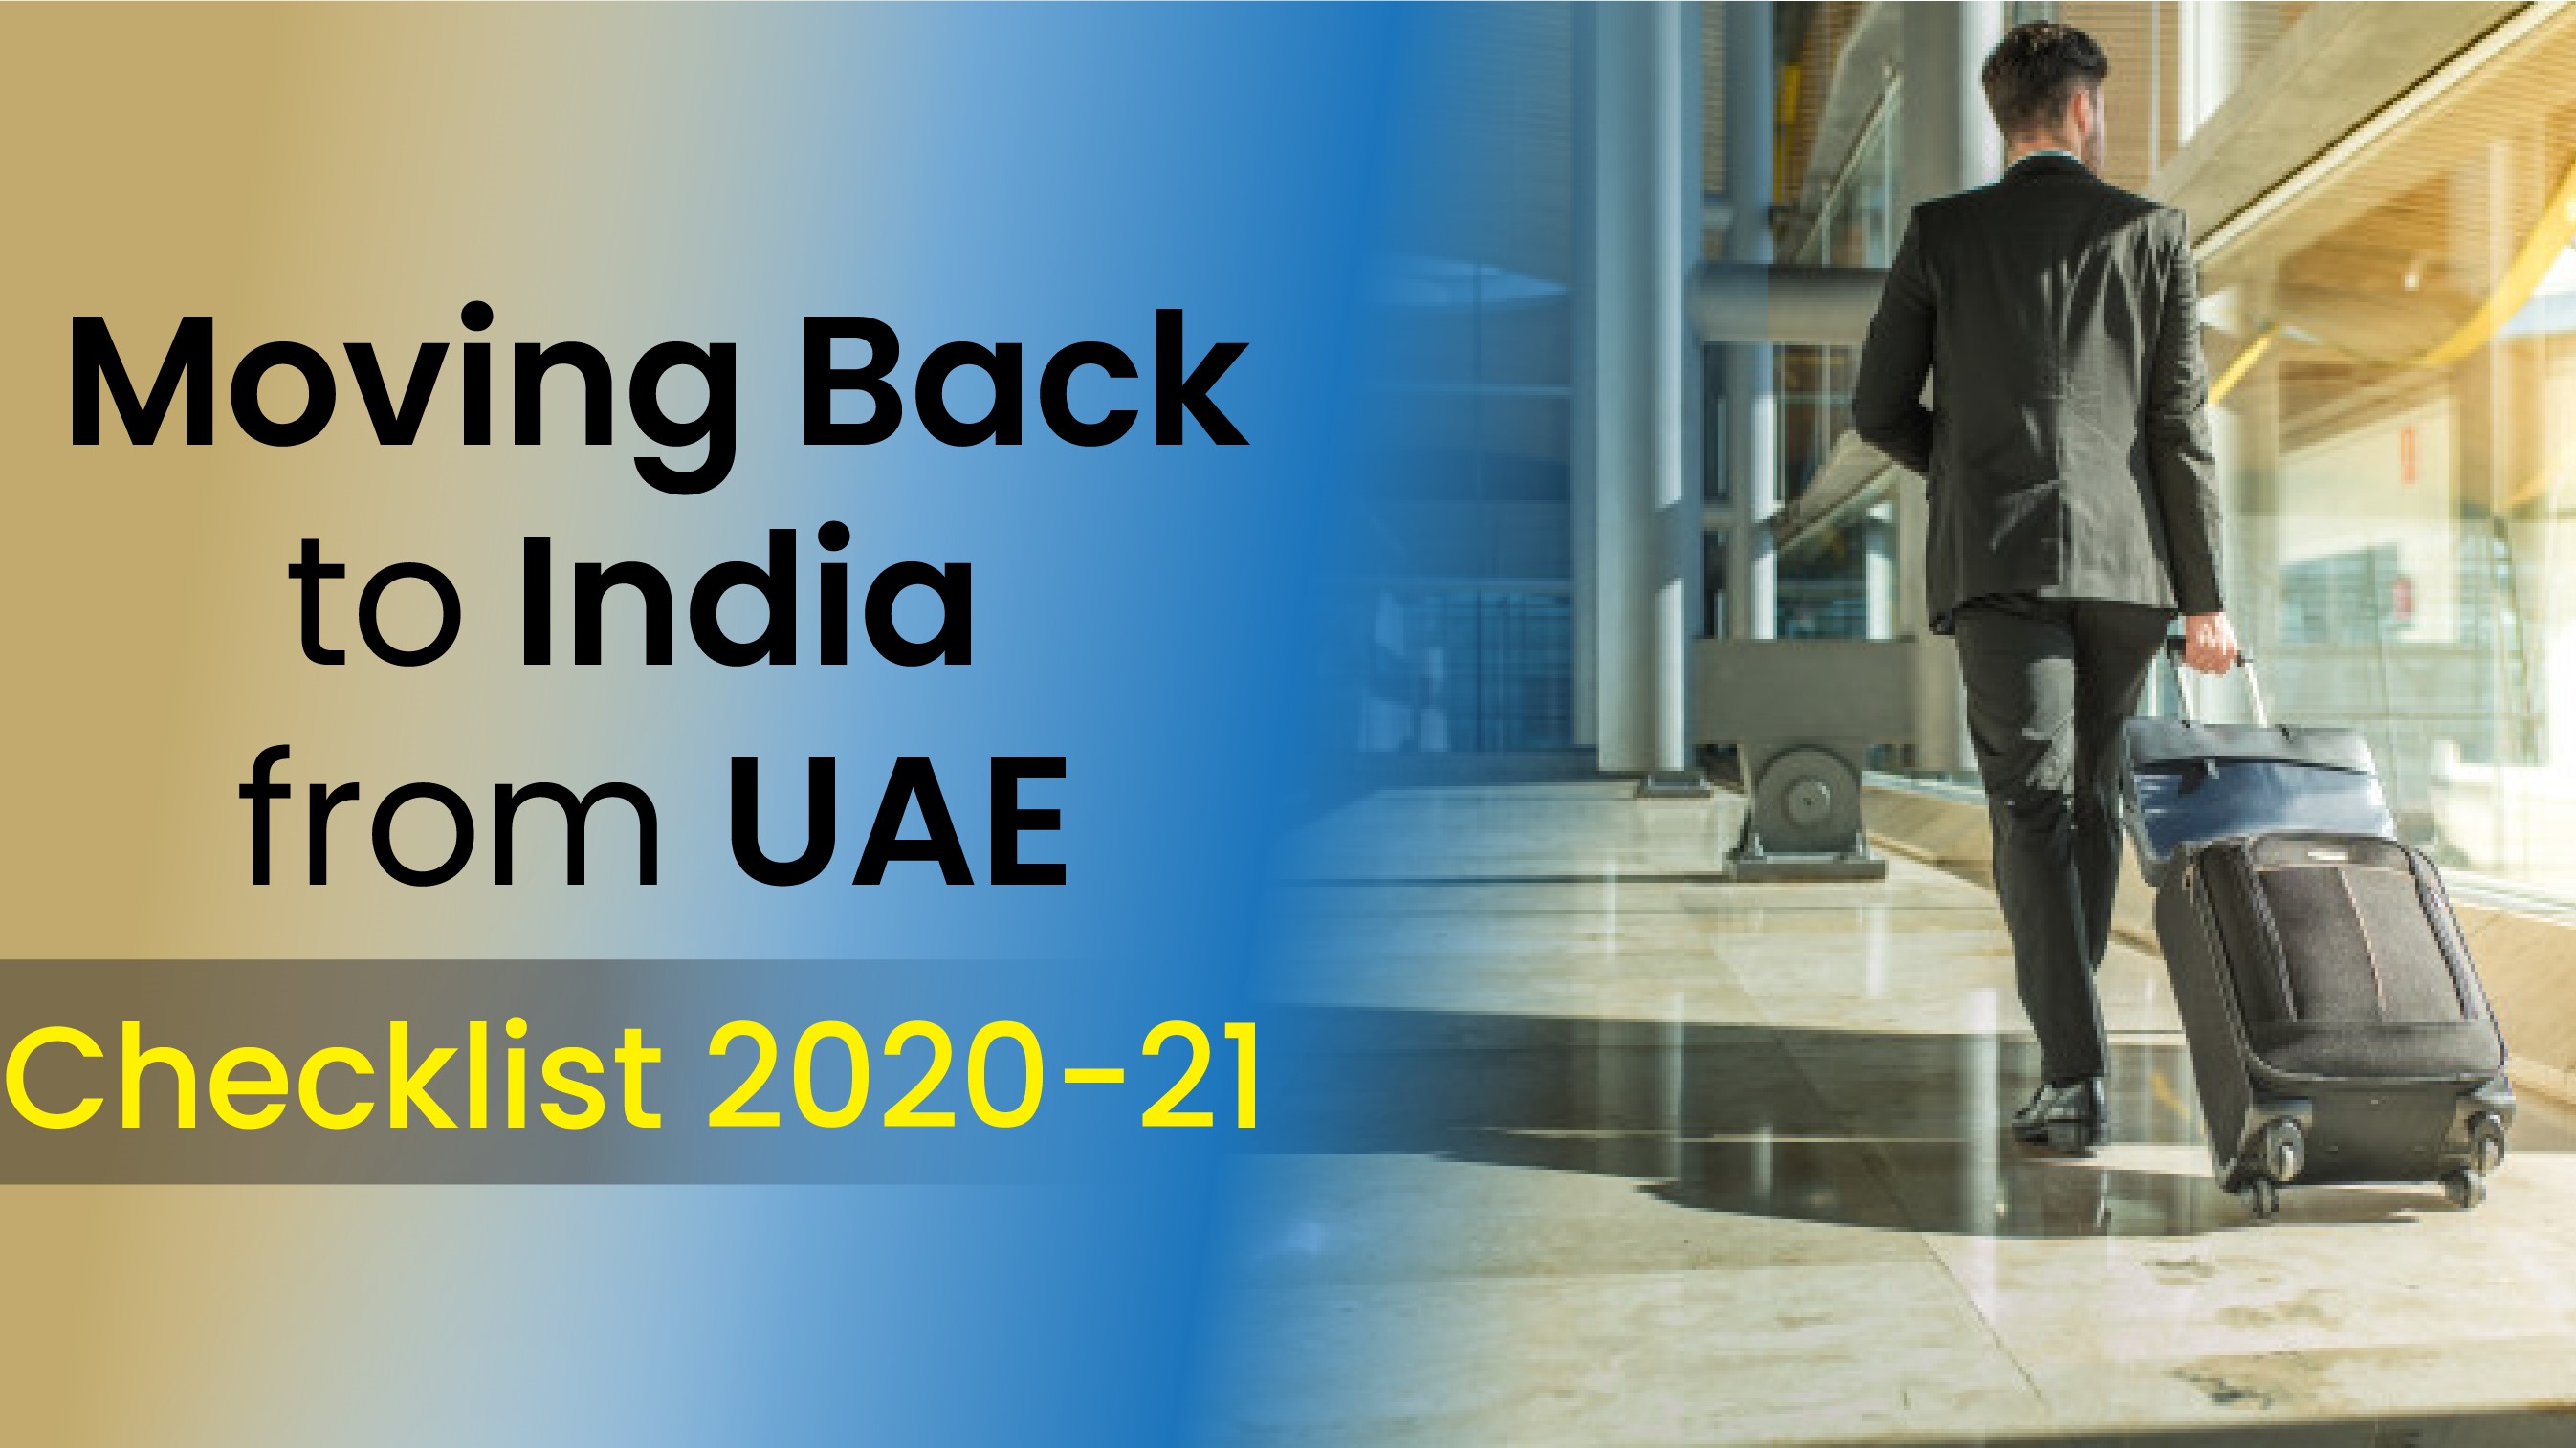 Moving Back to India from UAE: Checklist 2020-21